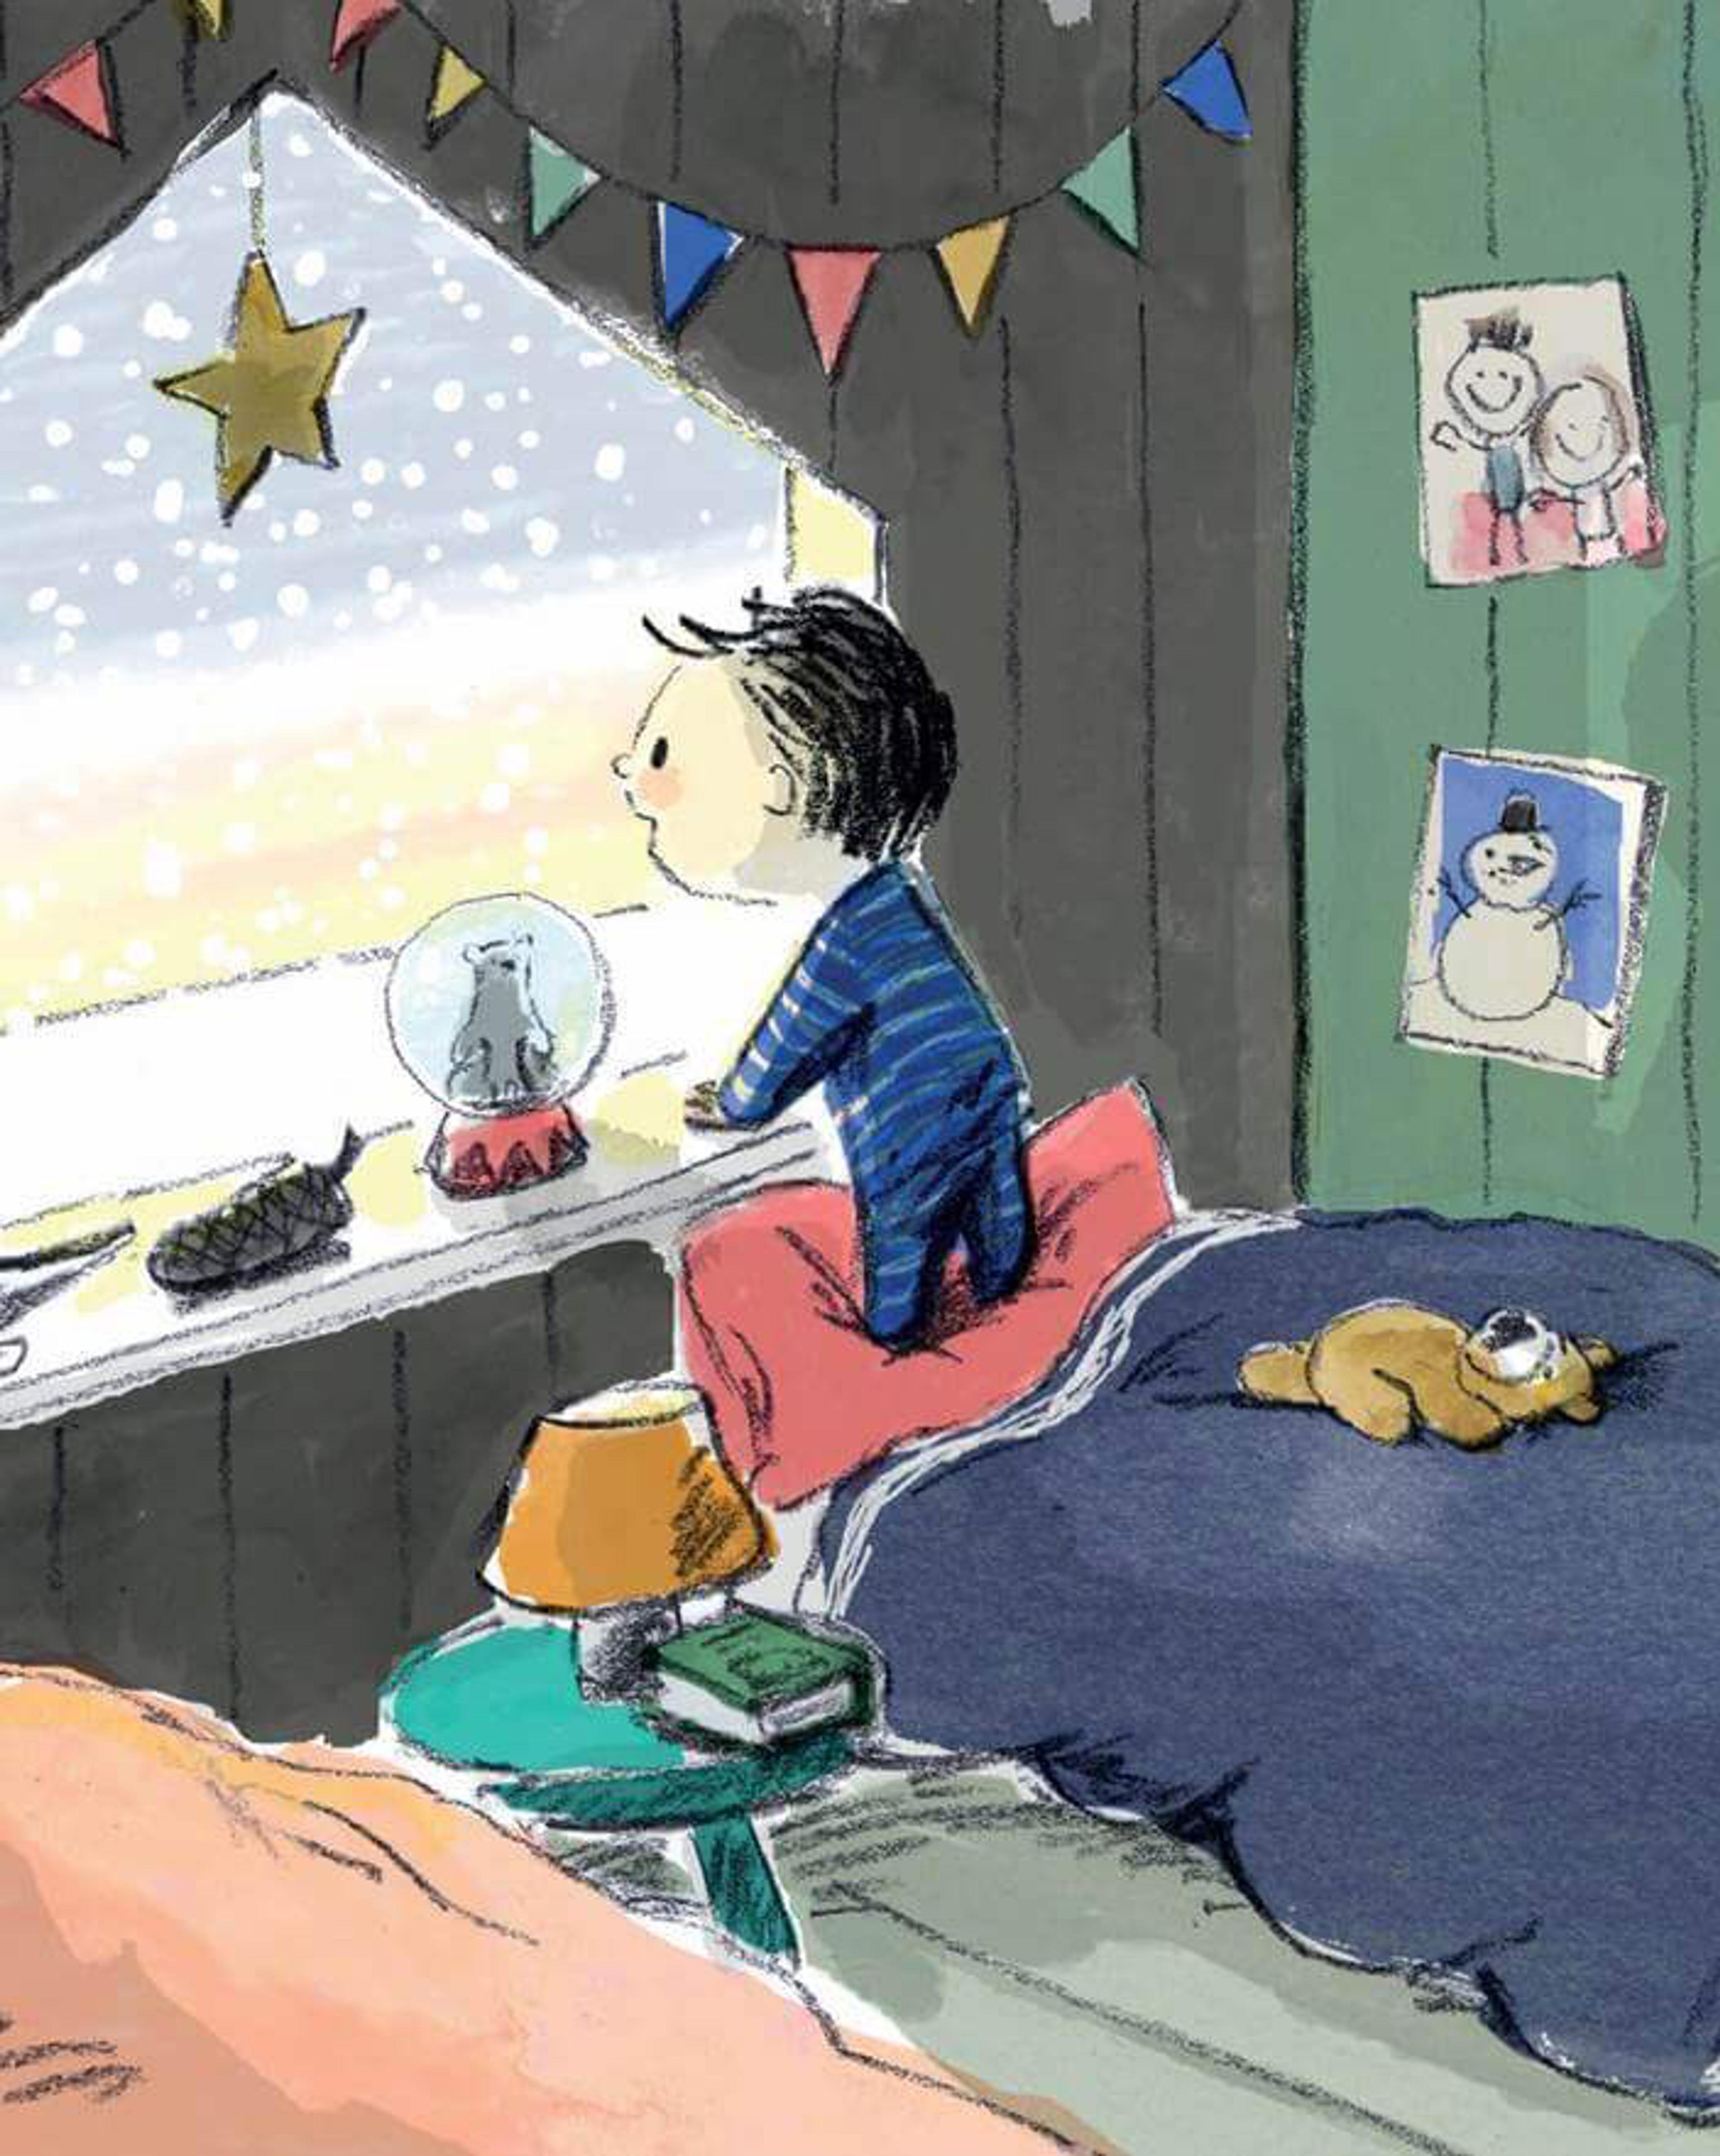 Illustration of a children looking out the window to snowy day.